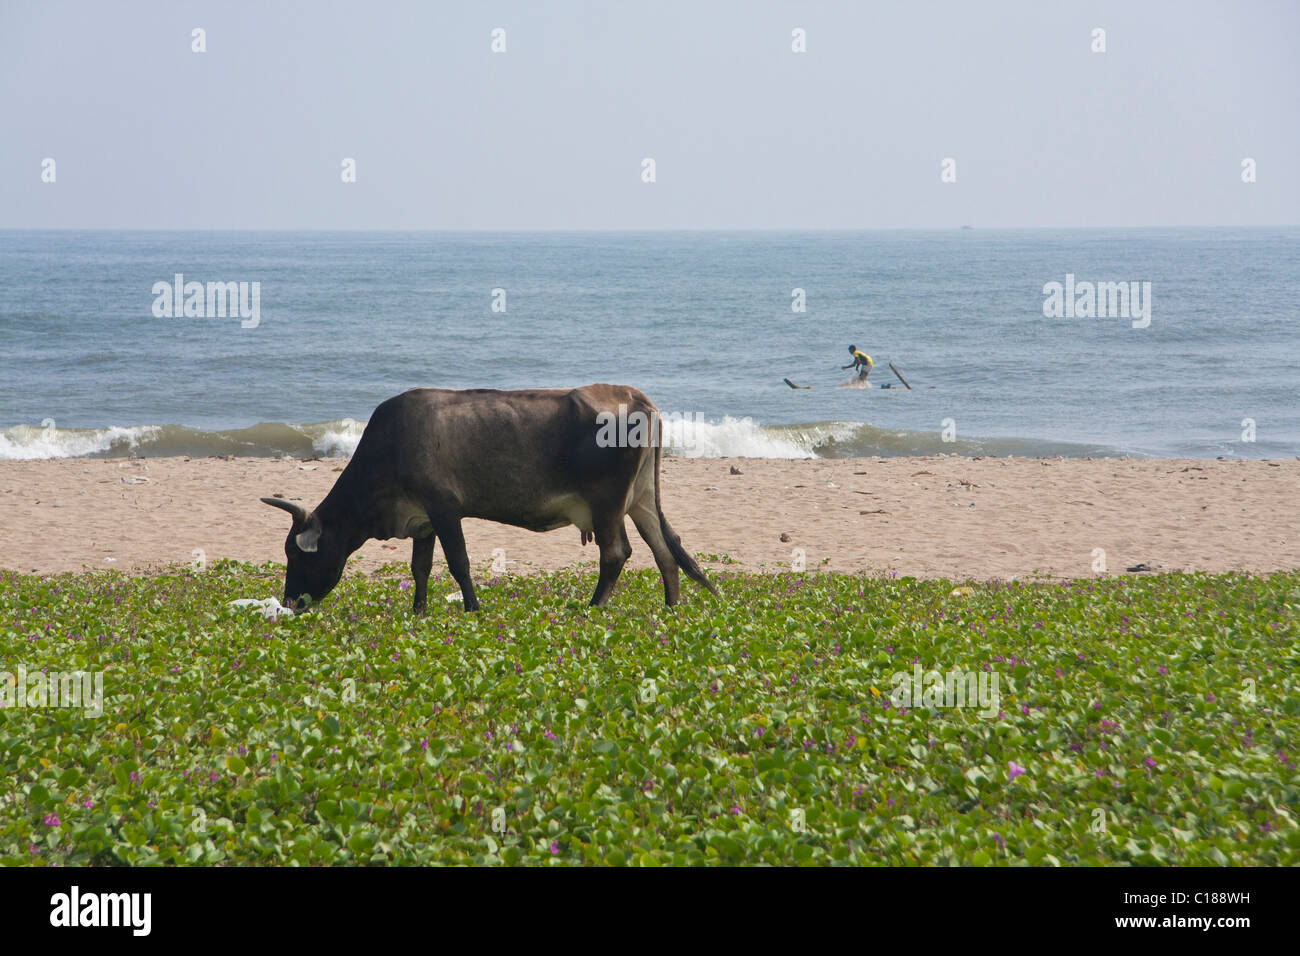 Cow at the beach eating grass and fisherman in the background. Stock Photo